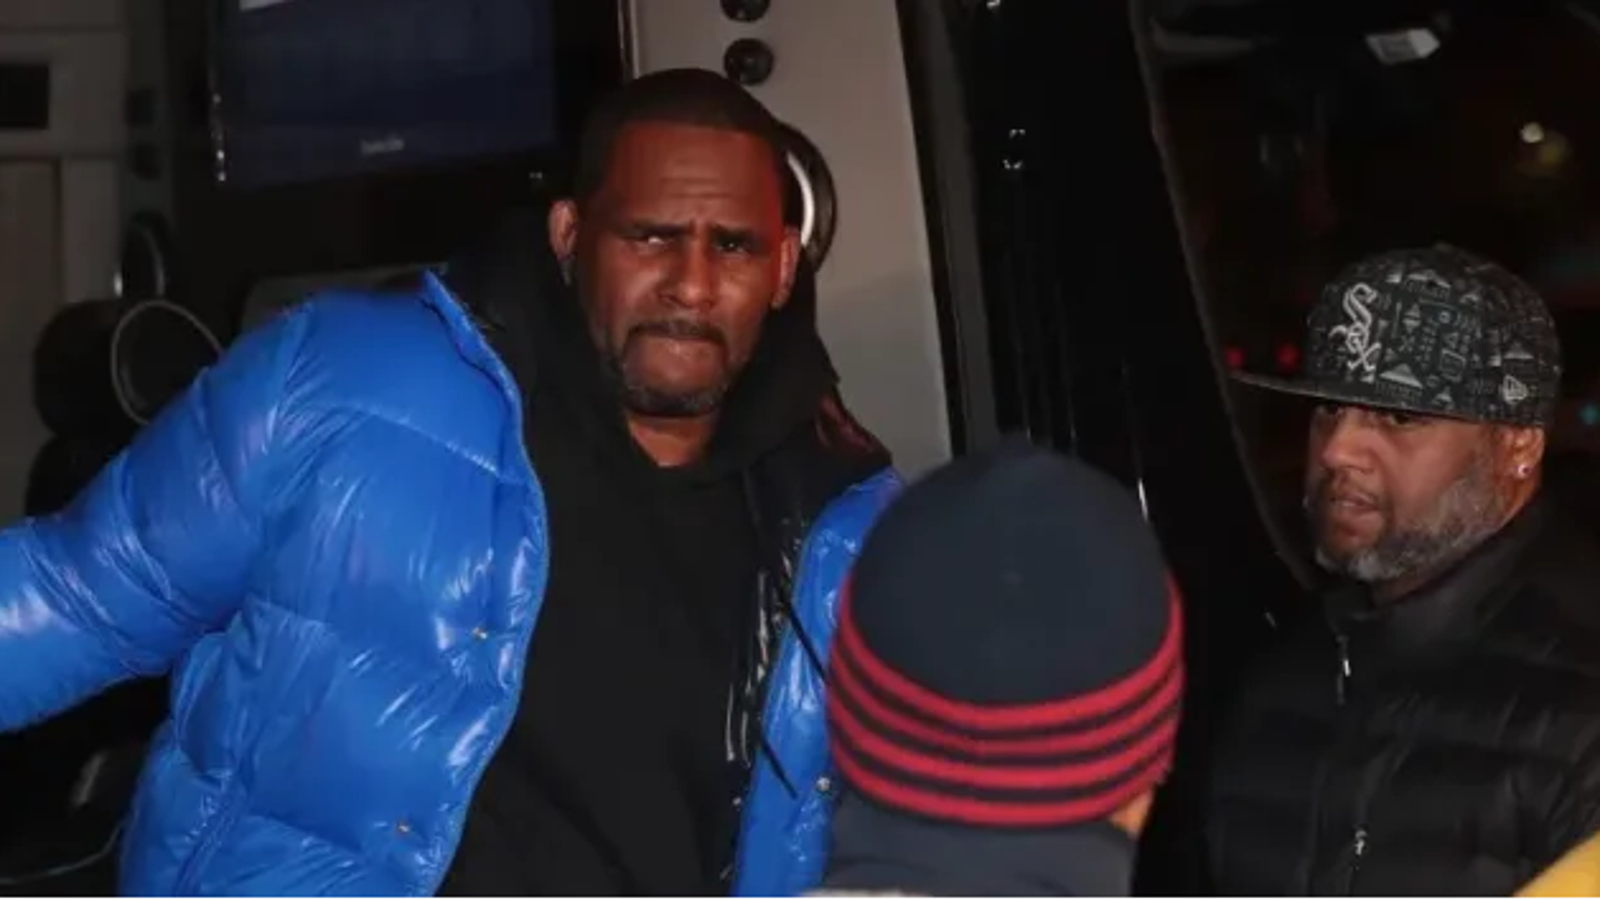 R. Kelly Gets Hysterical in New Interview With Gayle King